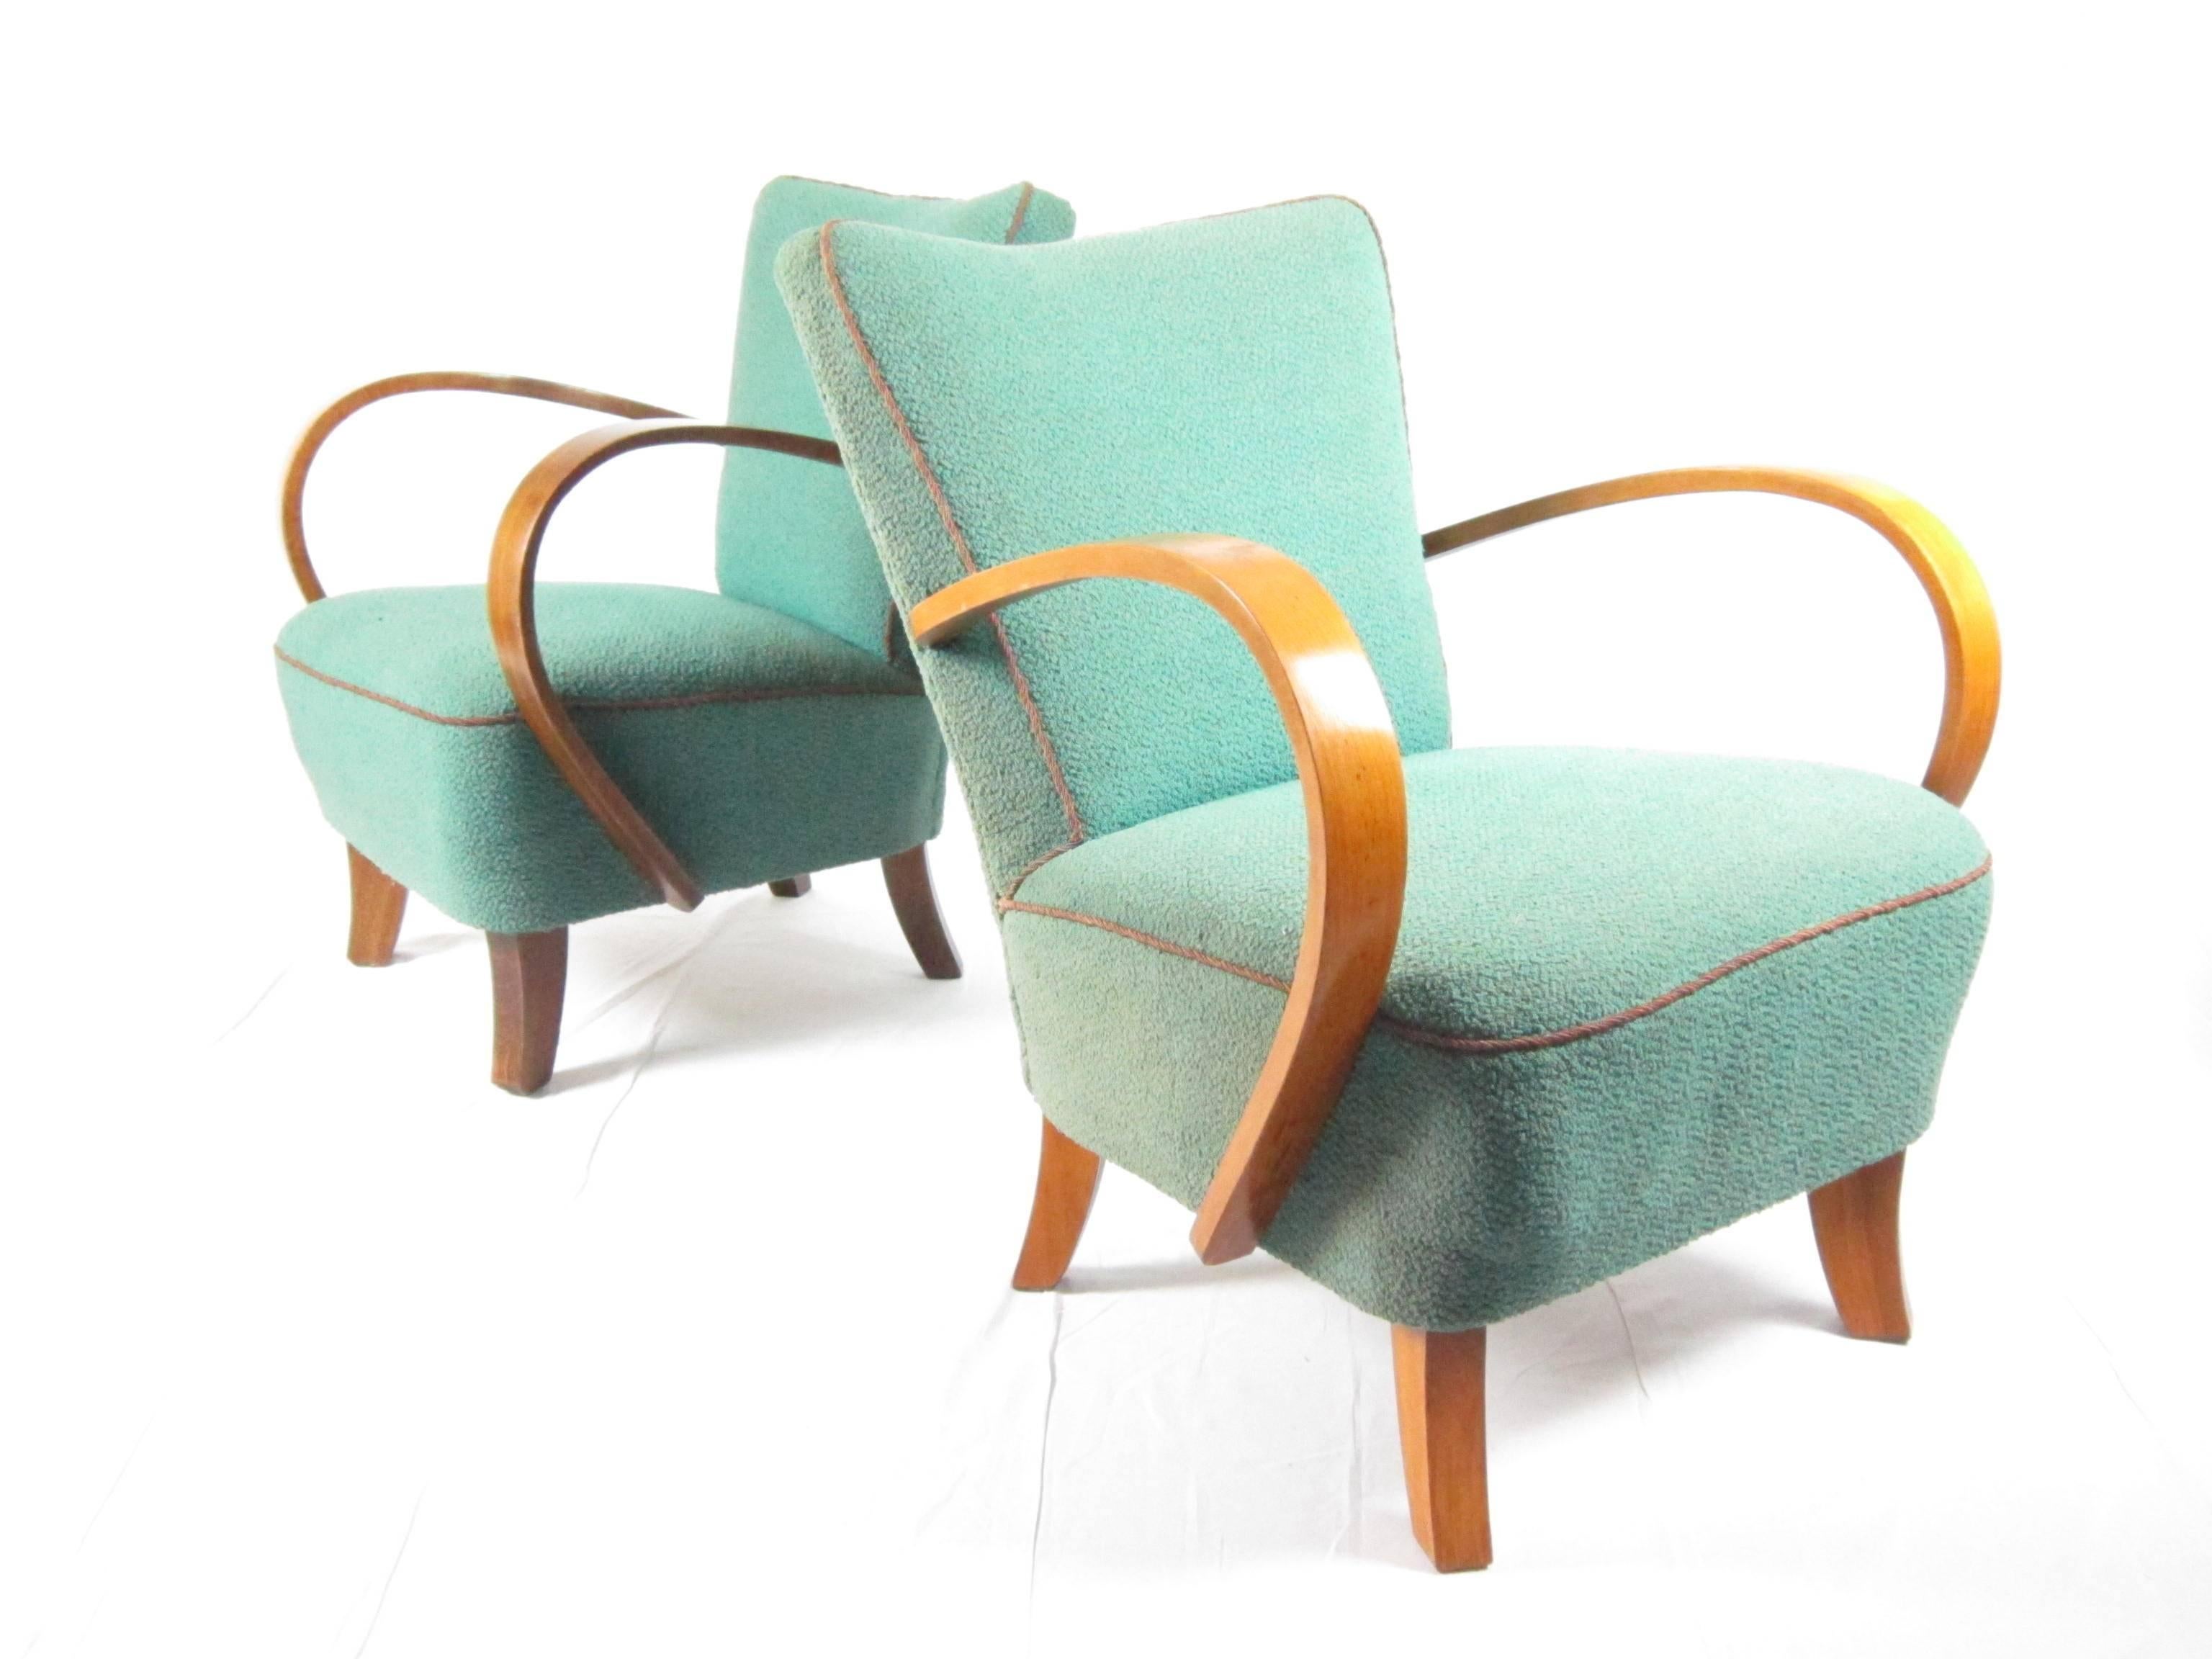 Pair of Jindrich Halabala bentwood chairs, made in Czech republik and designed by Jindrich Halabala, circa 1940
The items are in good original condition. Fabric upholstery has some dirty spots. (visible on the photos).